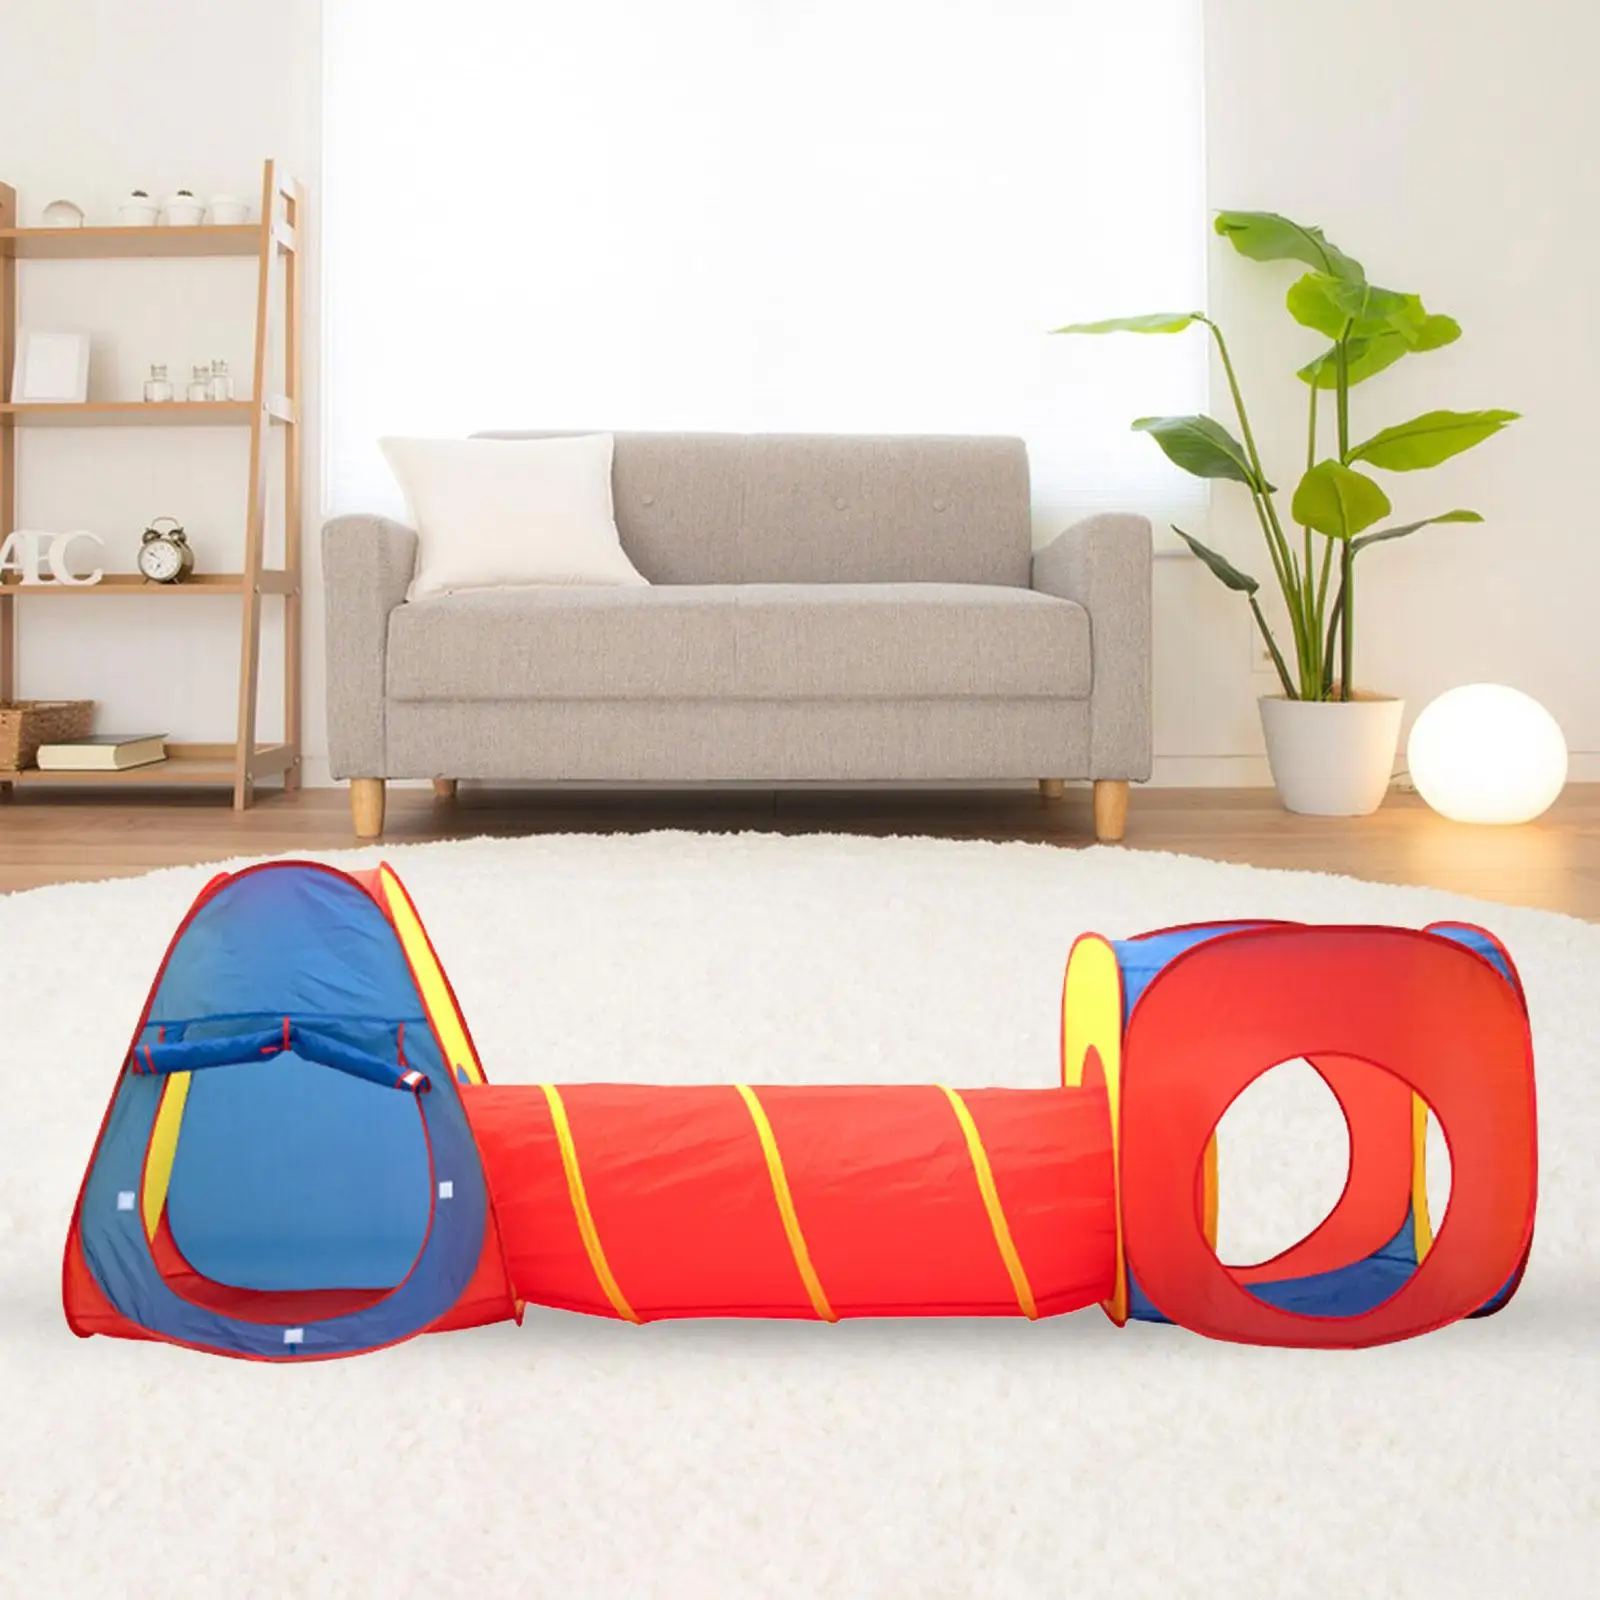 Kids Play Tents with Tunnels Indoor Outdoor Games for Park, Playground